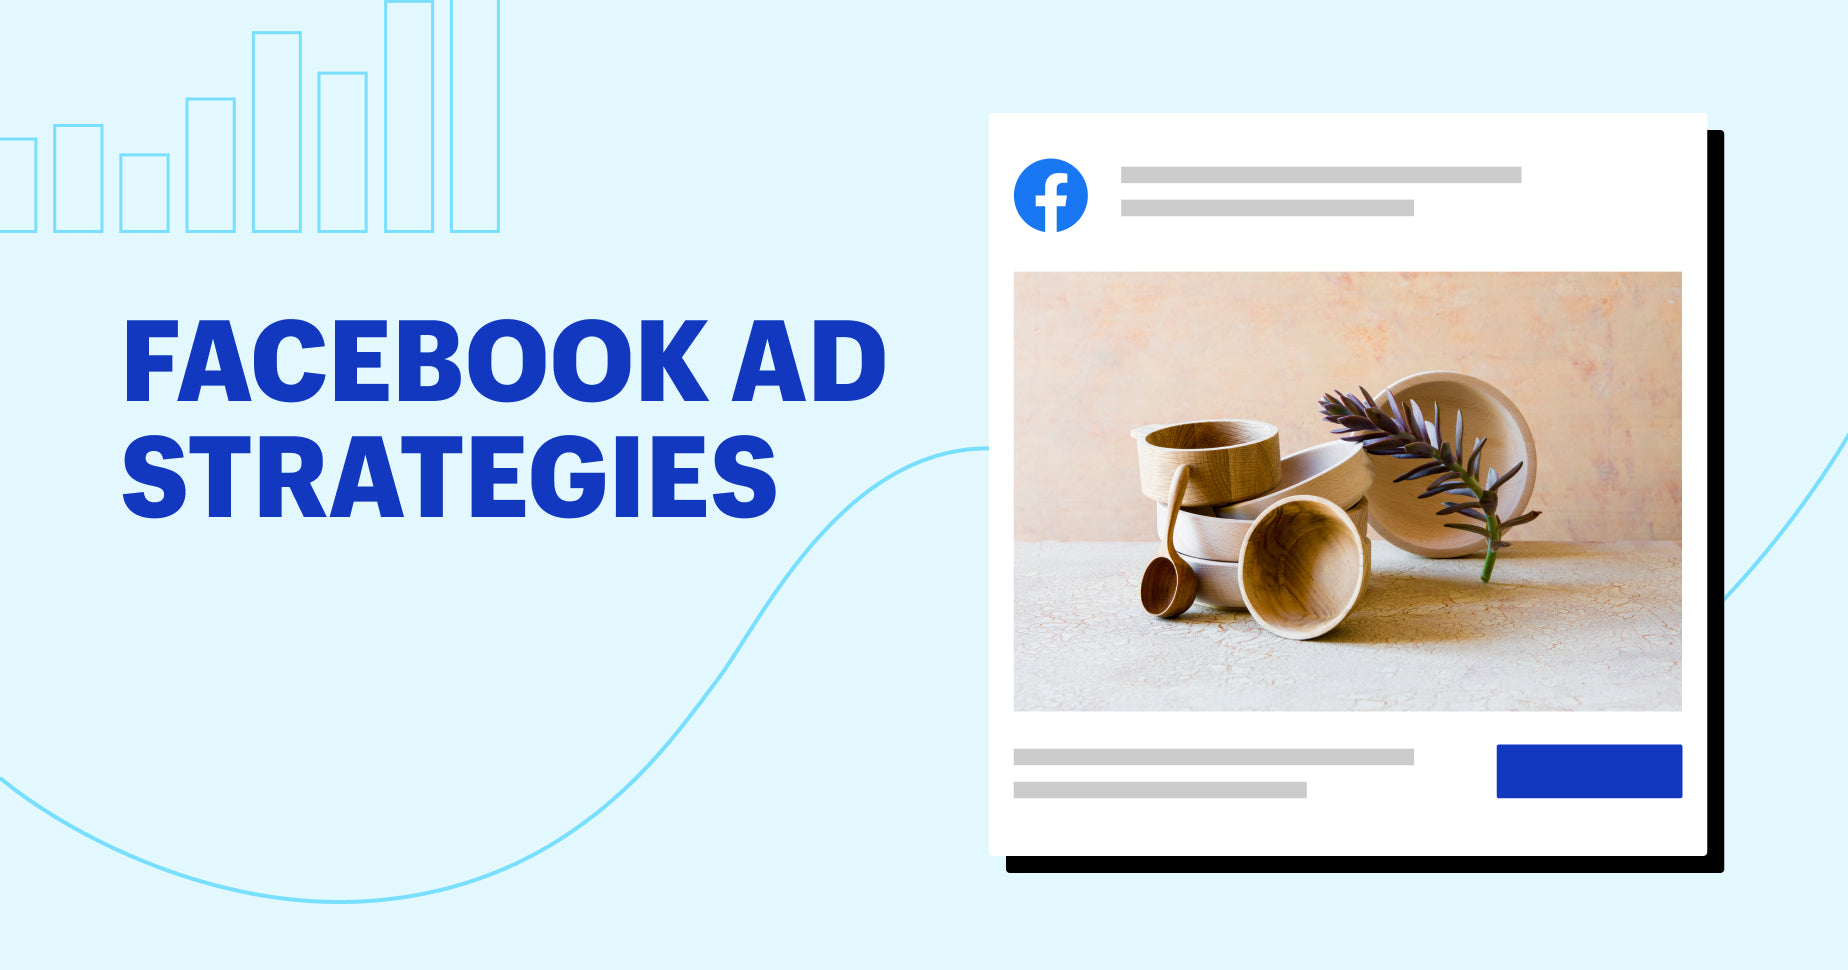 How to Advertise on Facebook + Strategies [Complete Guide]